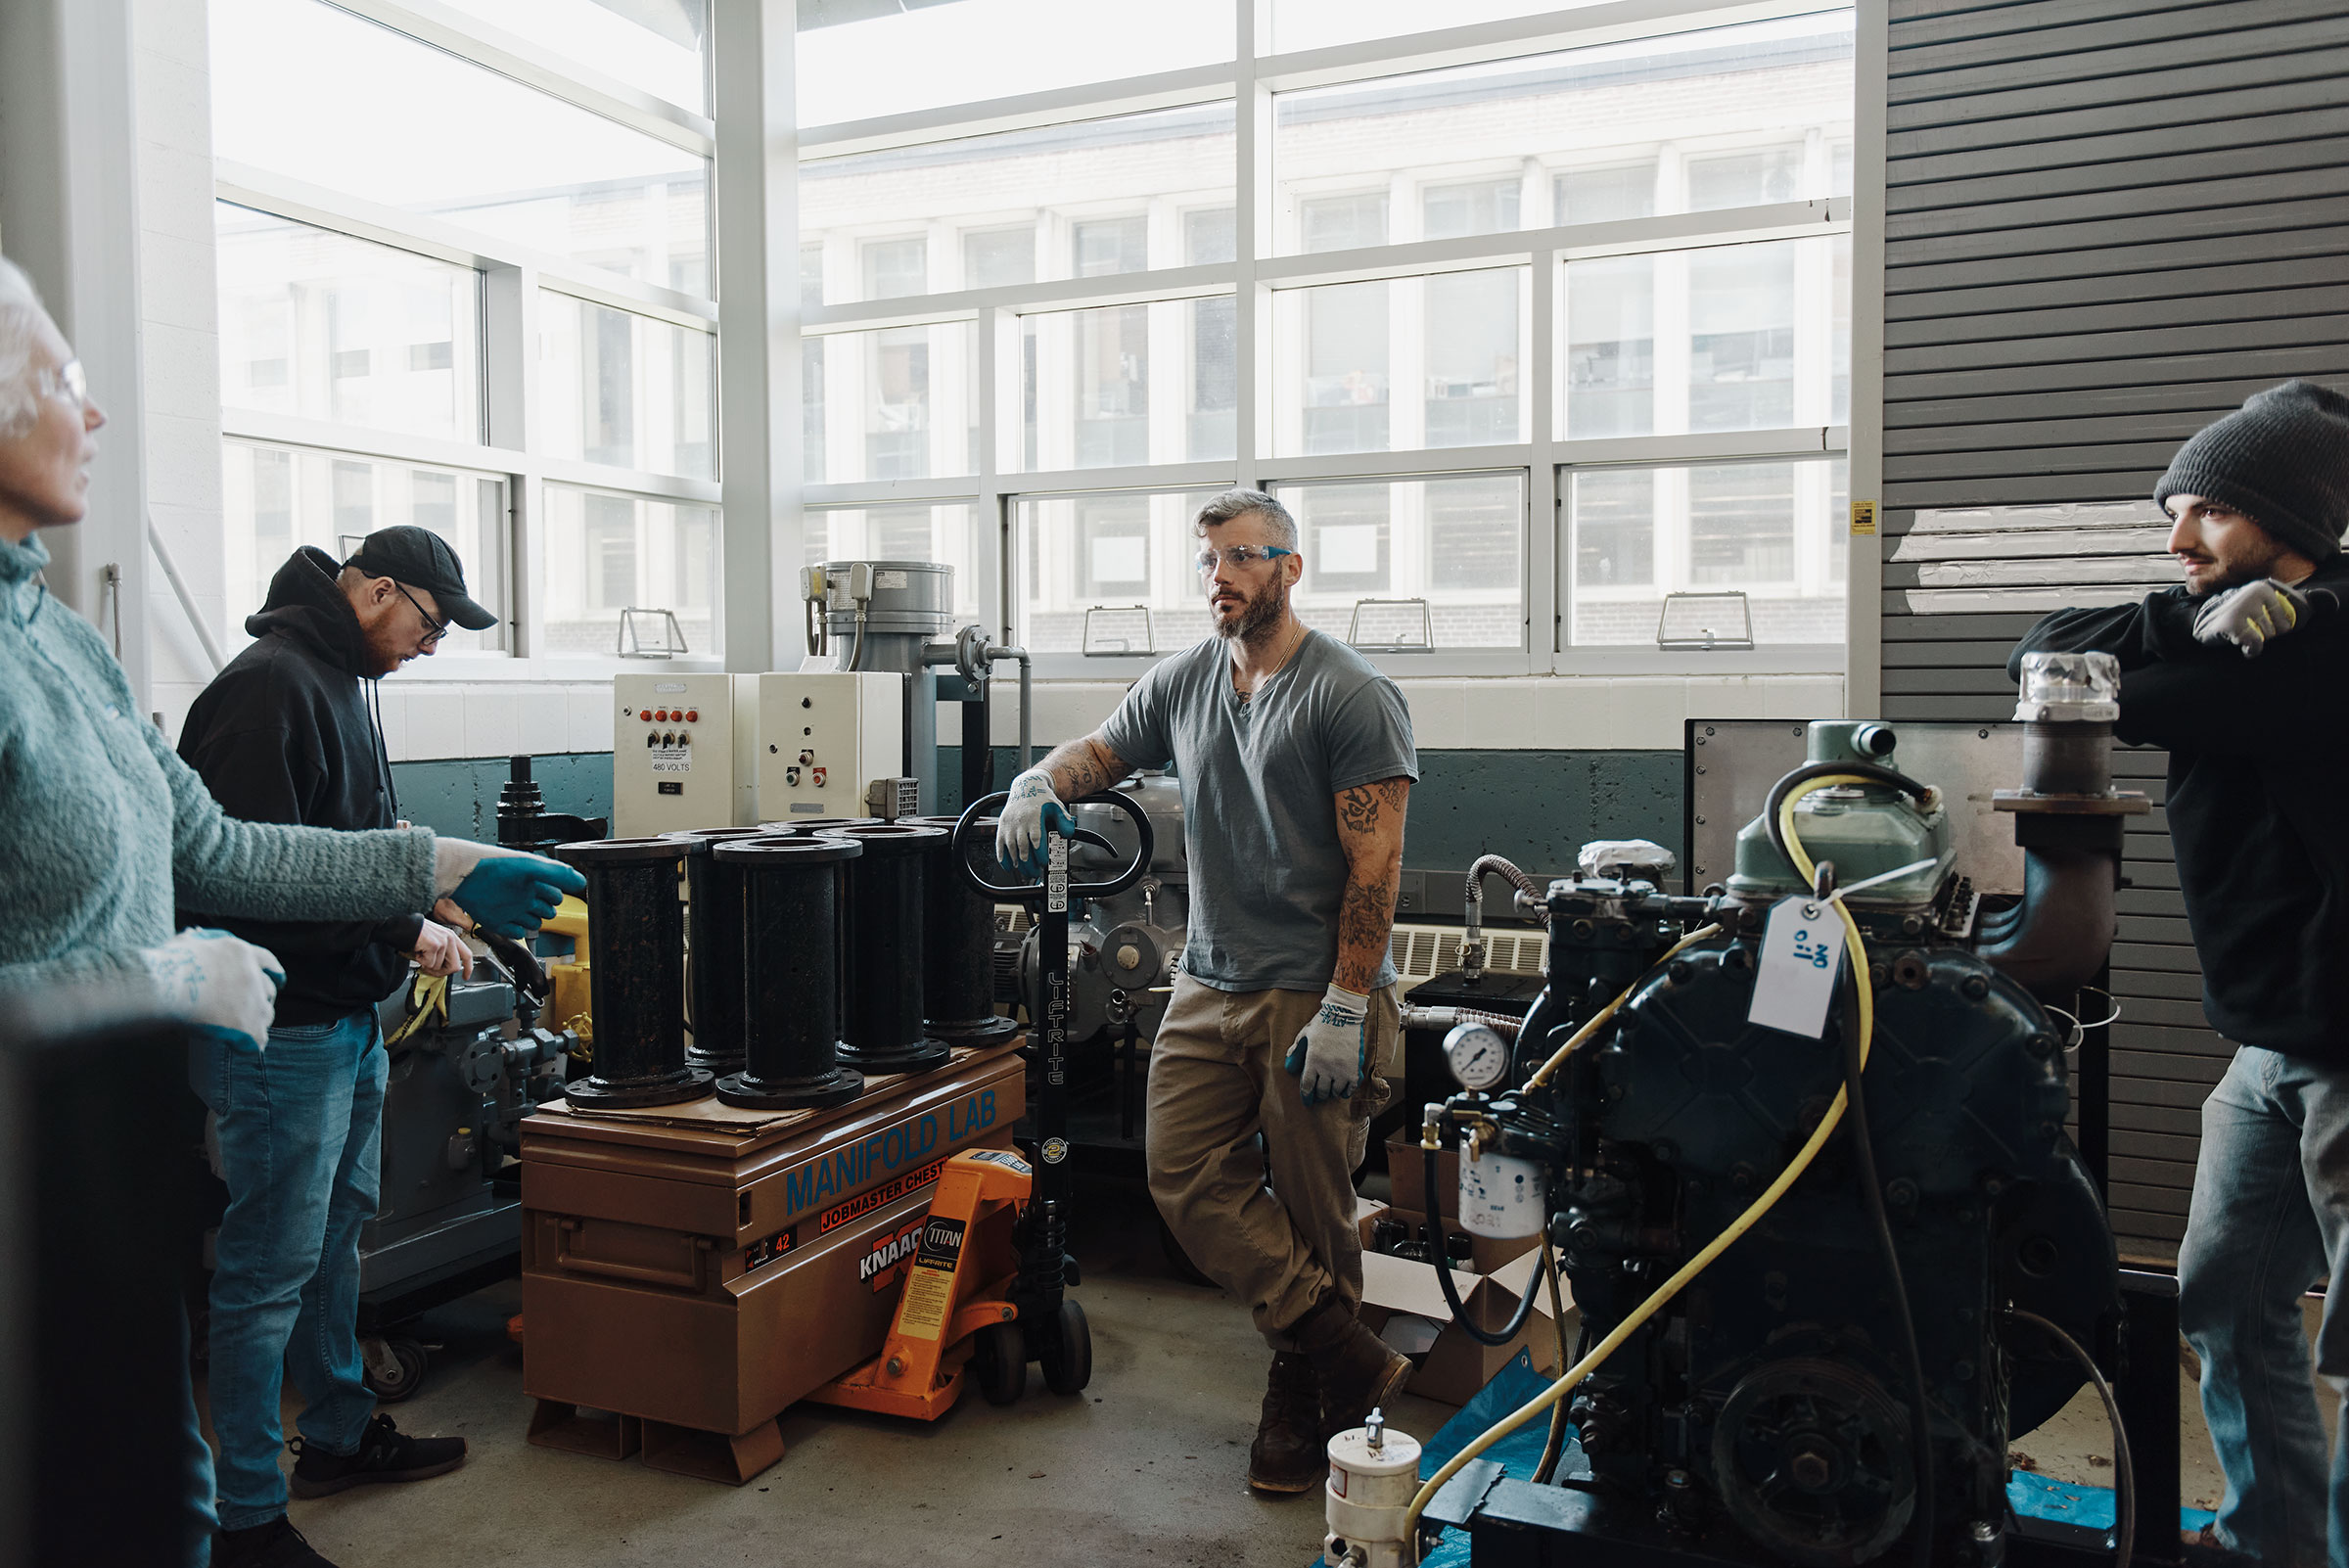 Paul Doolan, Nick Fileccia, and Gerard Mullin during an exercise about moving heavy equipment with instructor Megan Amsler. (Tony Luong for TIME)